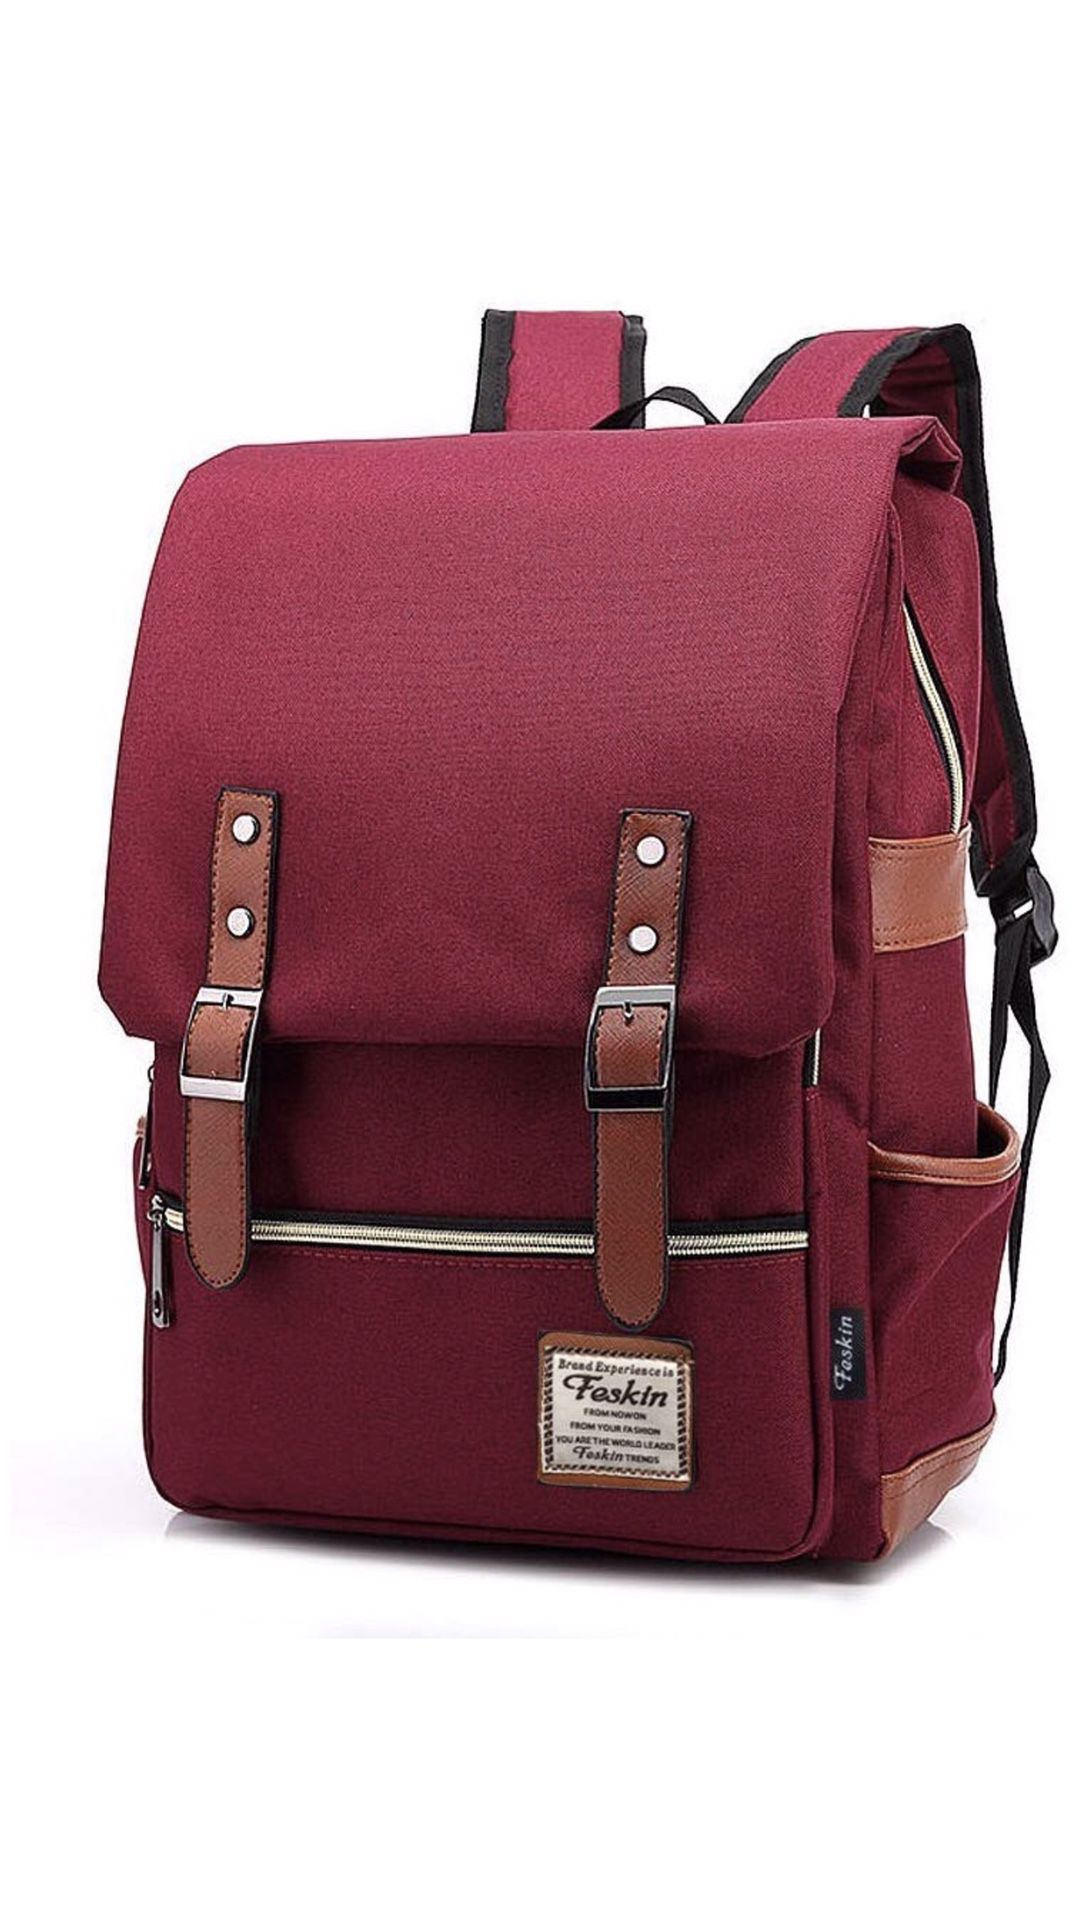 Unisex Professional Slim Business Laptop Backpack (Wine Red)